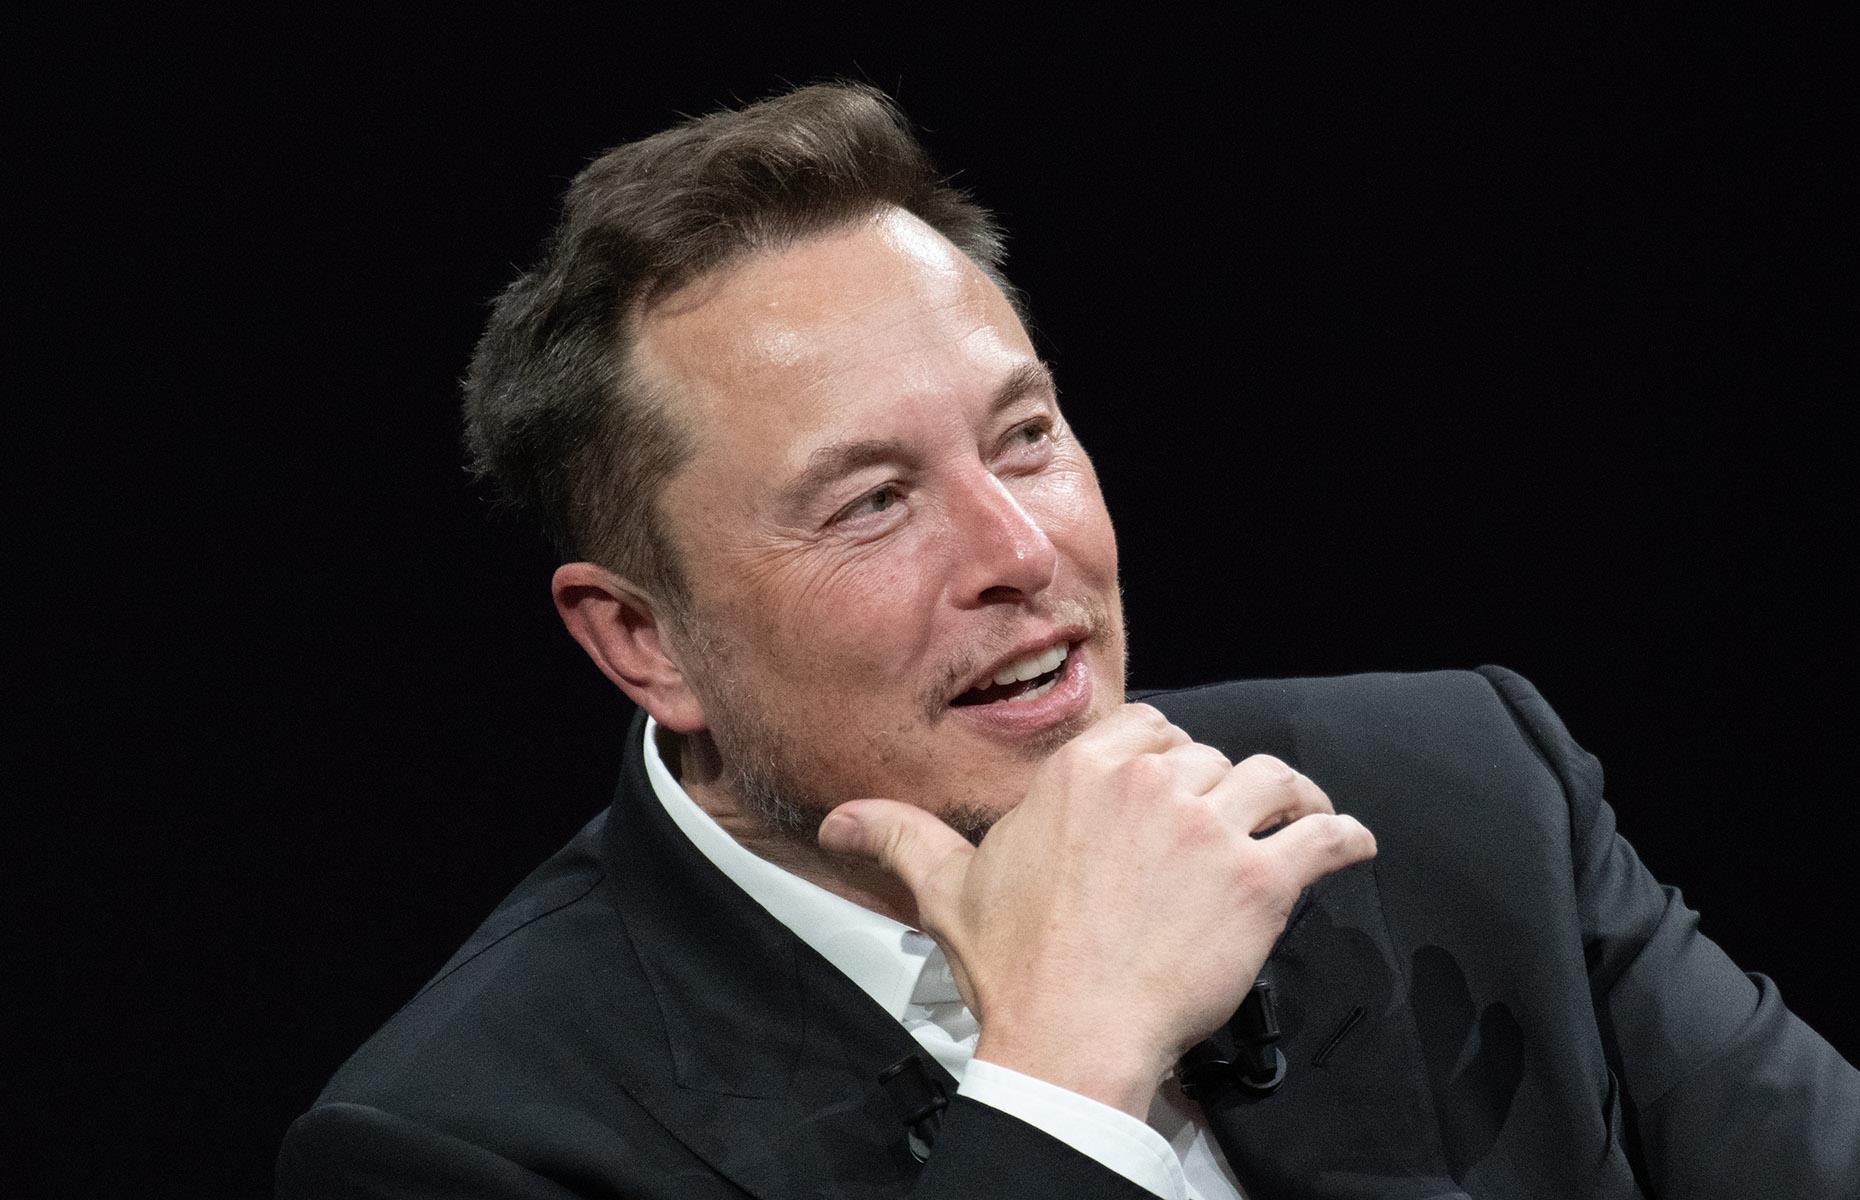 <p>Musk may have founded an AI company, but he's also famous for his warnings about the potential dangers artificial intelligence poses to humanity. </p>  <p>He believes that humans may become reliant on AI over time and has even predicted a future in which humanity could be subordinate to machines.</p>  <p>During an interview with Tucker Carlson earlier this year, Musk claimed that "AI is more dangerous than, say, mismanaged aircraft design or production maintenance or bad car production,, adding that "it has the potential of civilization destruction."</p>  <p>Musk has advocated for caution in creating AI and even signed an open letter backing a temporary suspension of its development in March 2023. He's also criticized other tech billionaires, including Mark Zuckerberg and Bill Gates, for having a limited understanding of the subject.</p>